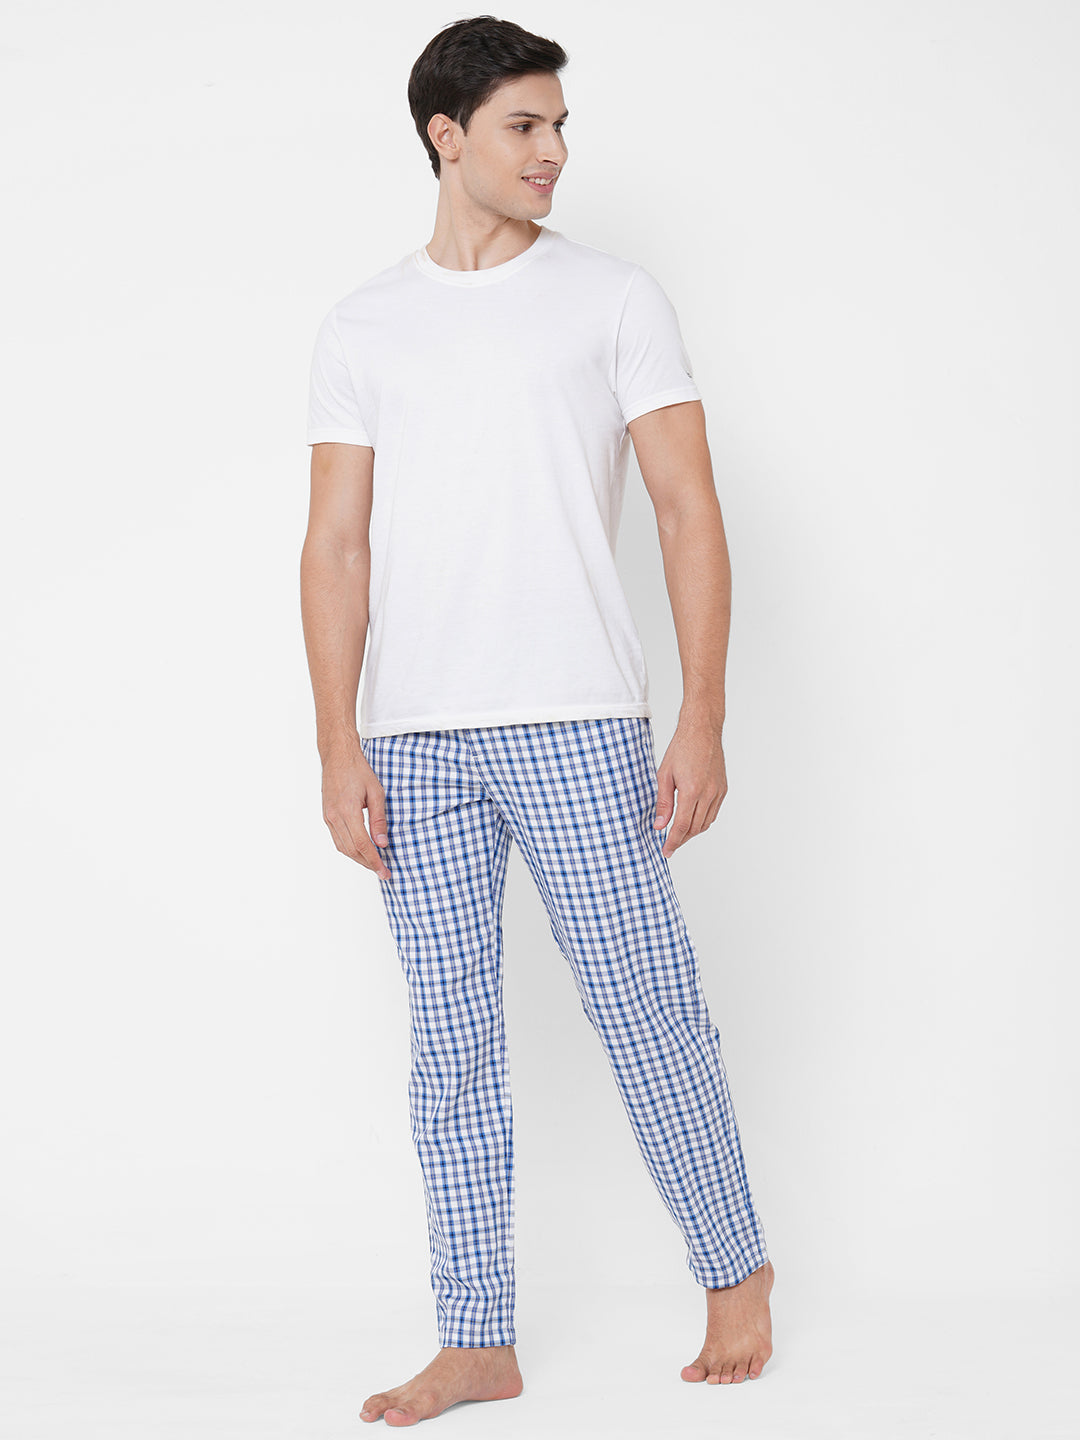 Men's Checkered, Blue, Cotton, Cotton, Elasticated, Waistband, Pyjama  With Side Pockets